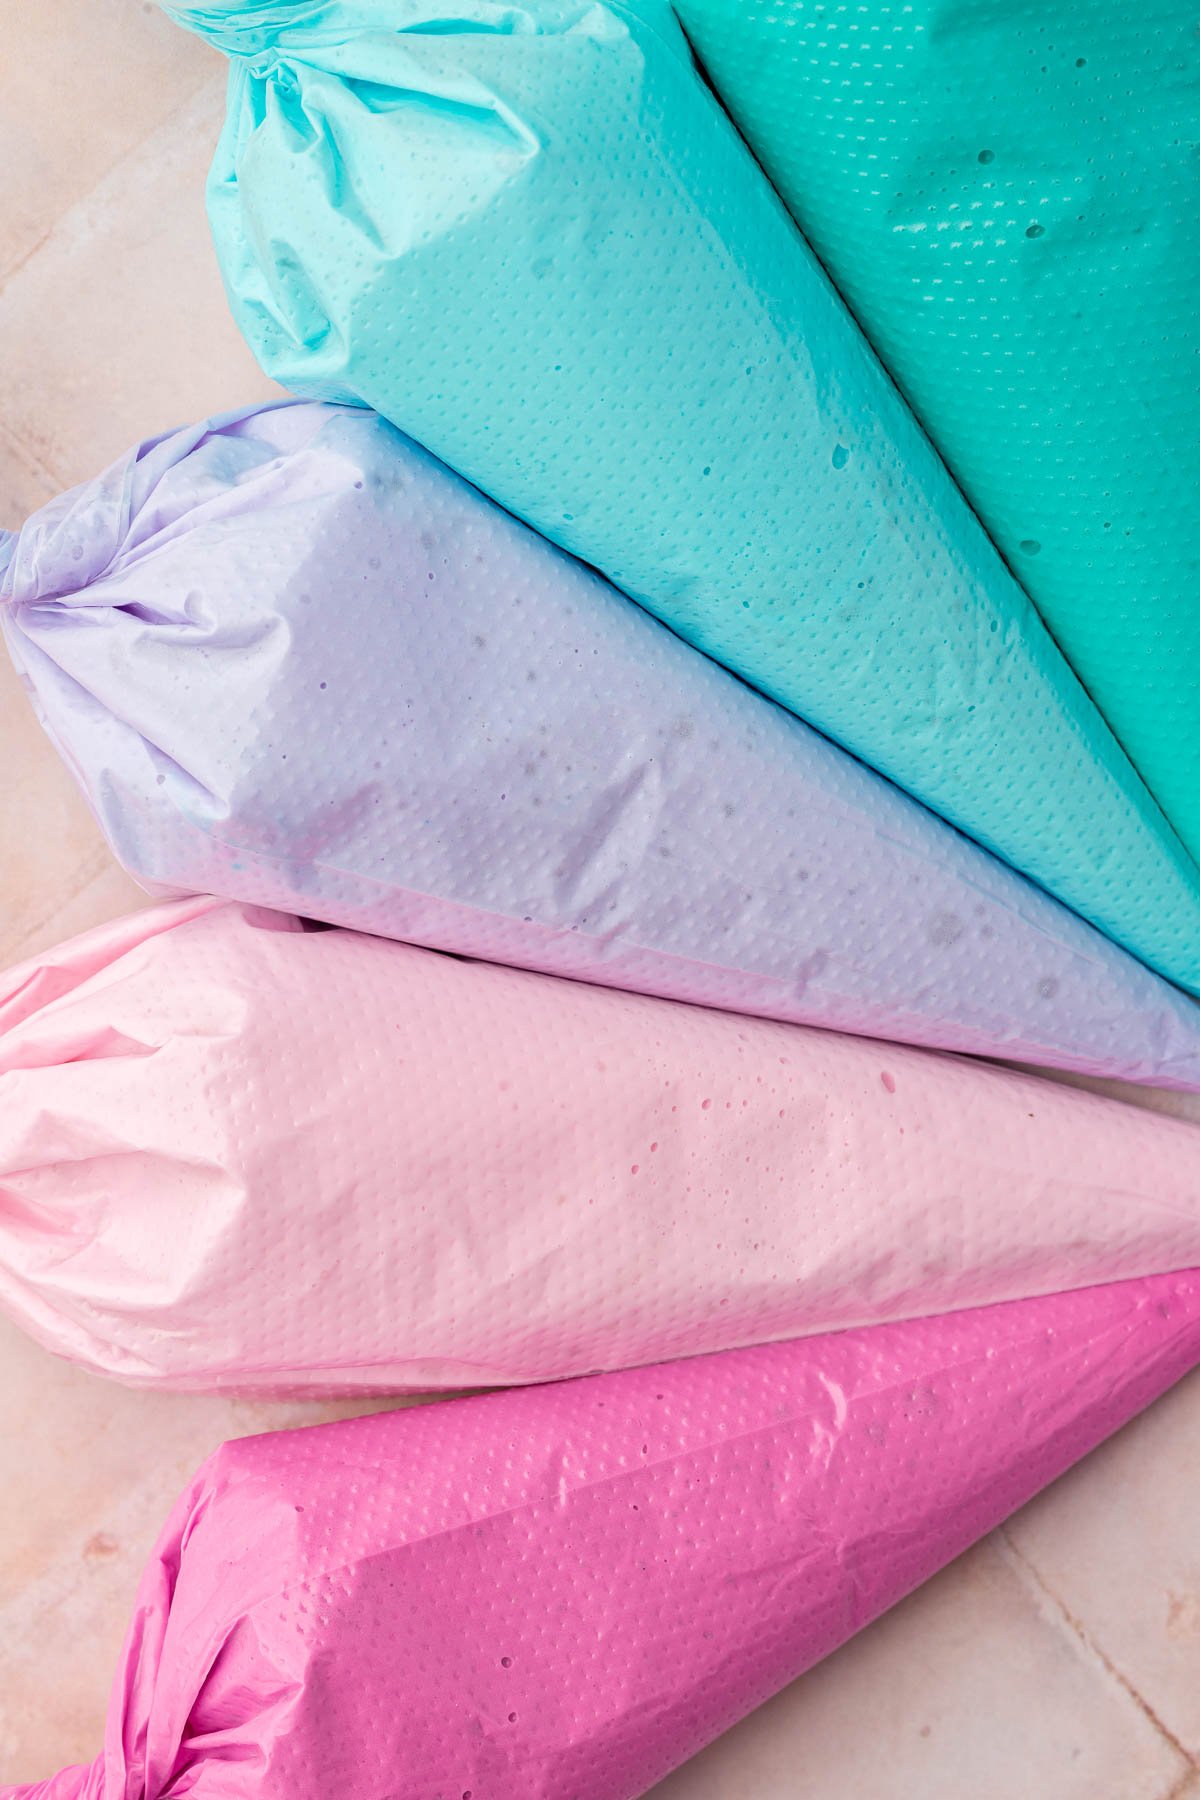 Five disposable pastry bags filled each with a different color of royal icing, teal, blue, purple, light pink and fuchsia.